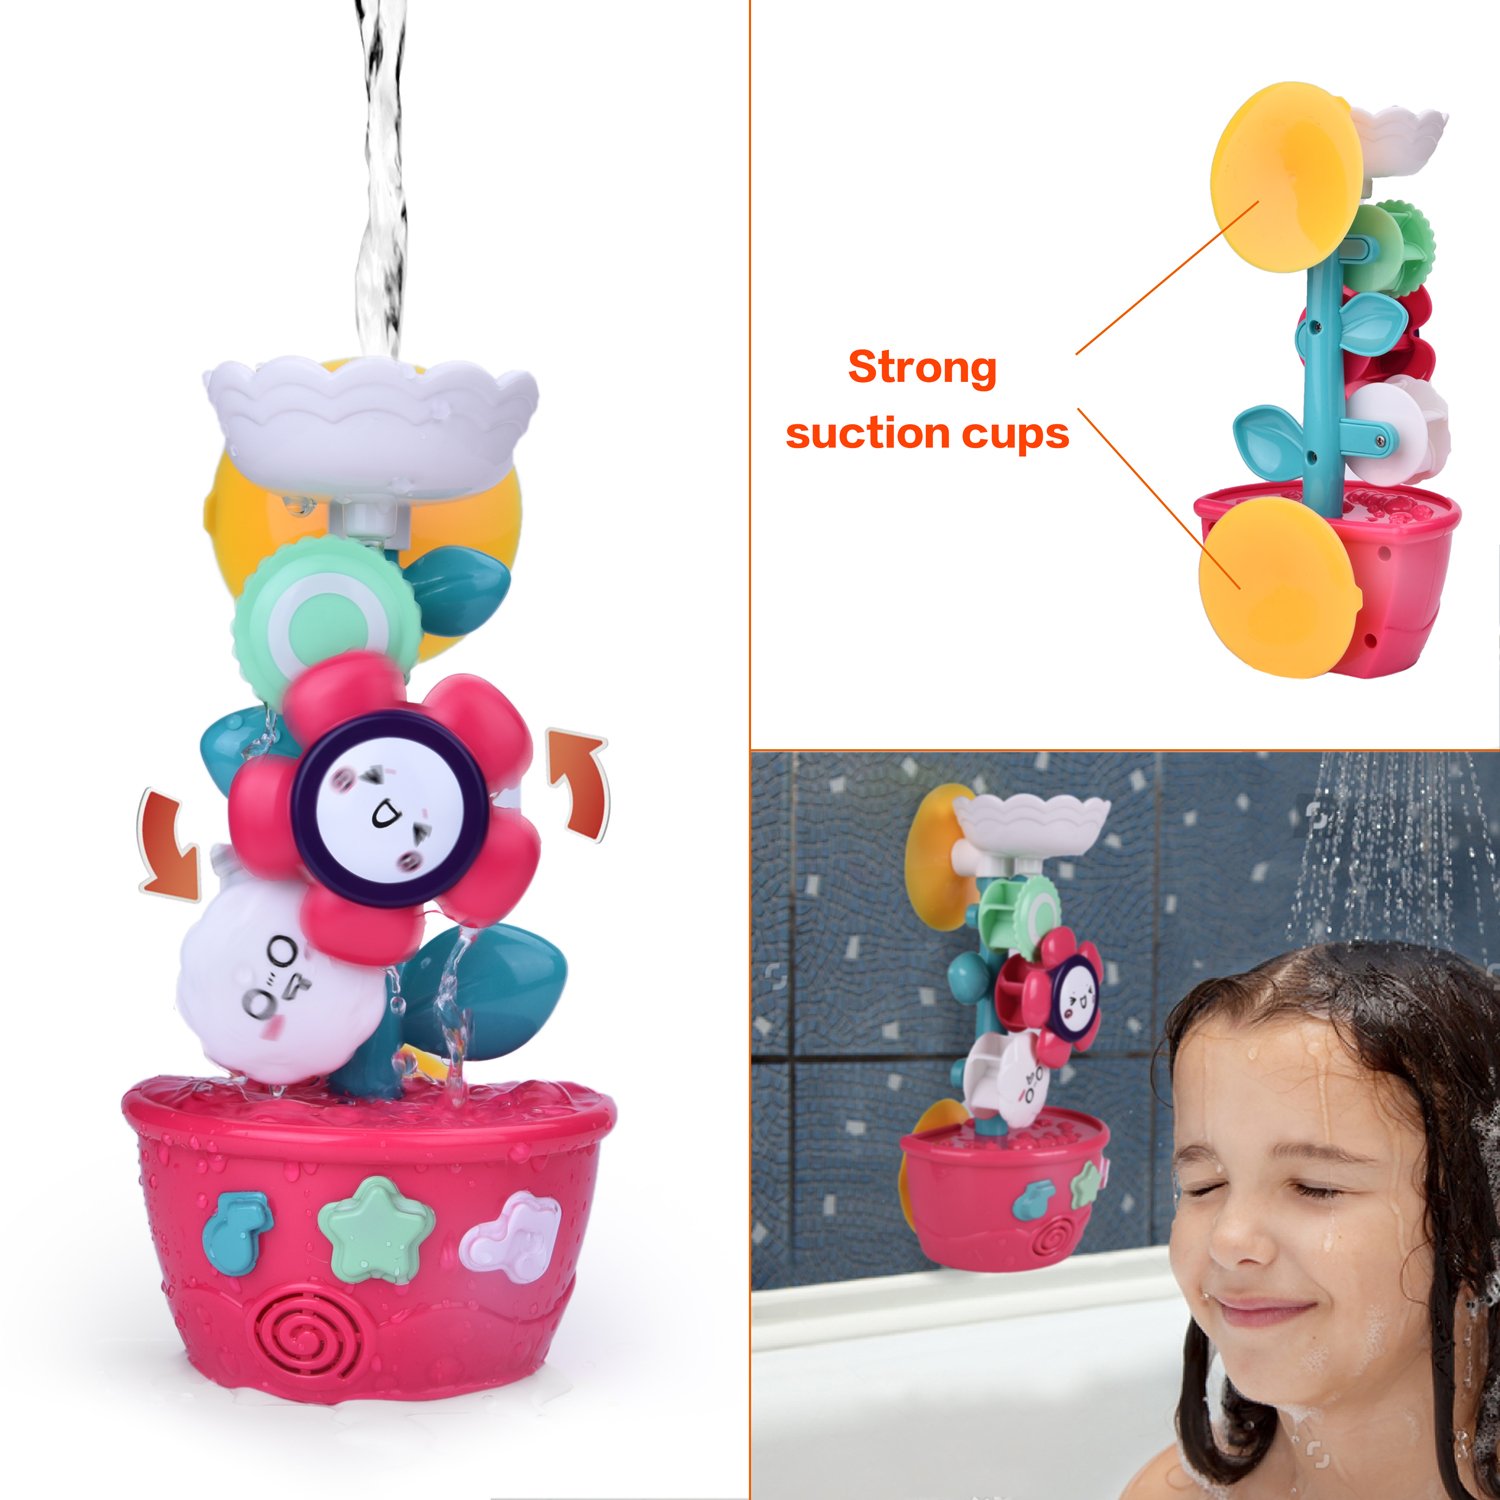 16 PCs Bath Toys for Toddlers, Flower Waterfall Water Station Garden Squirter Toys, Stacking Cups Watering Can, Bath Toy Organizer Included for Kids Toddlers